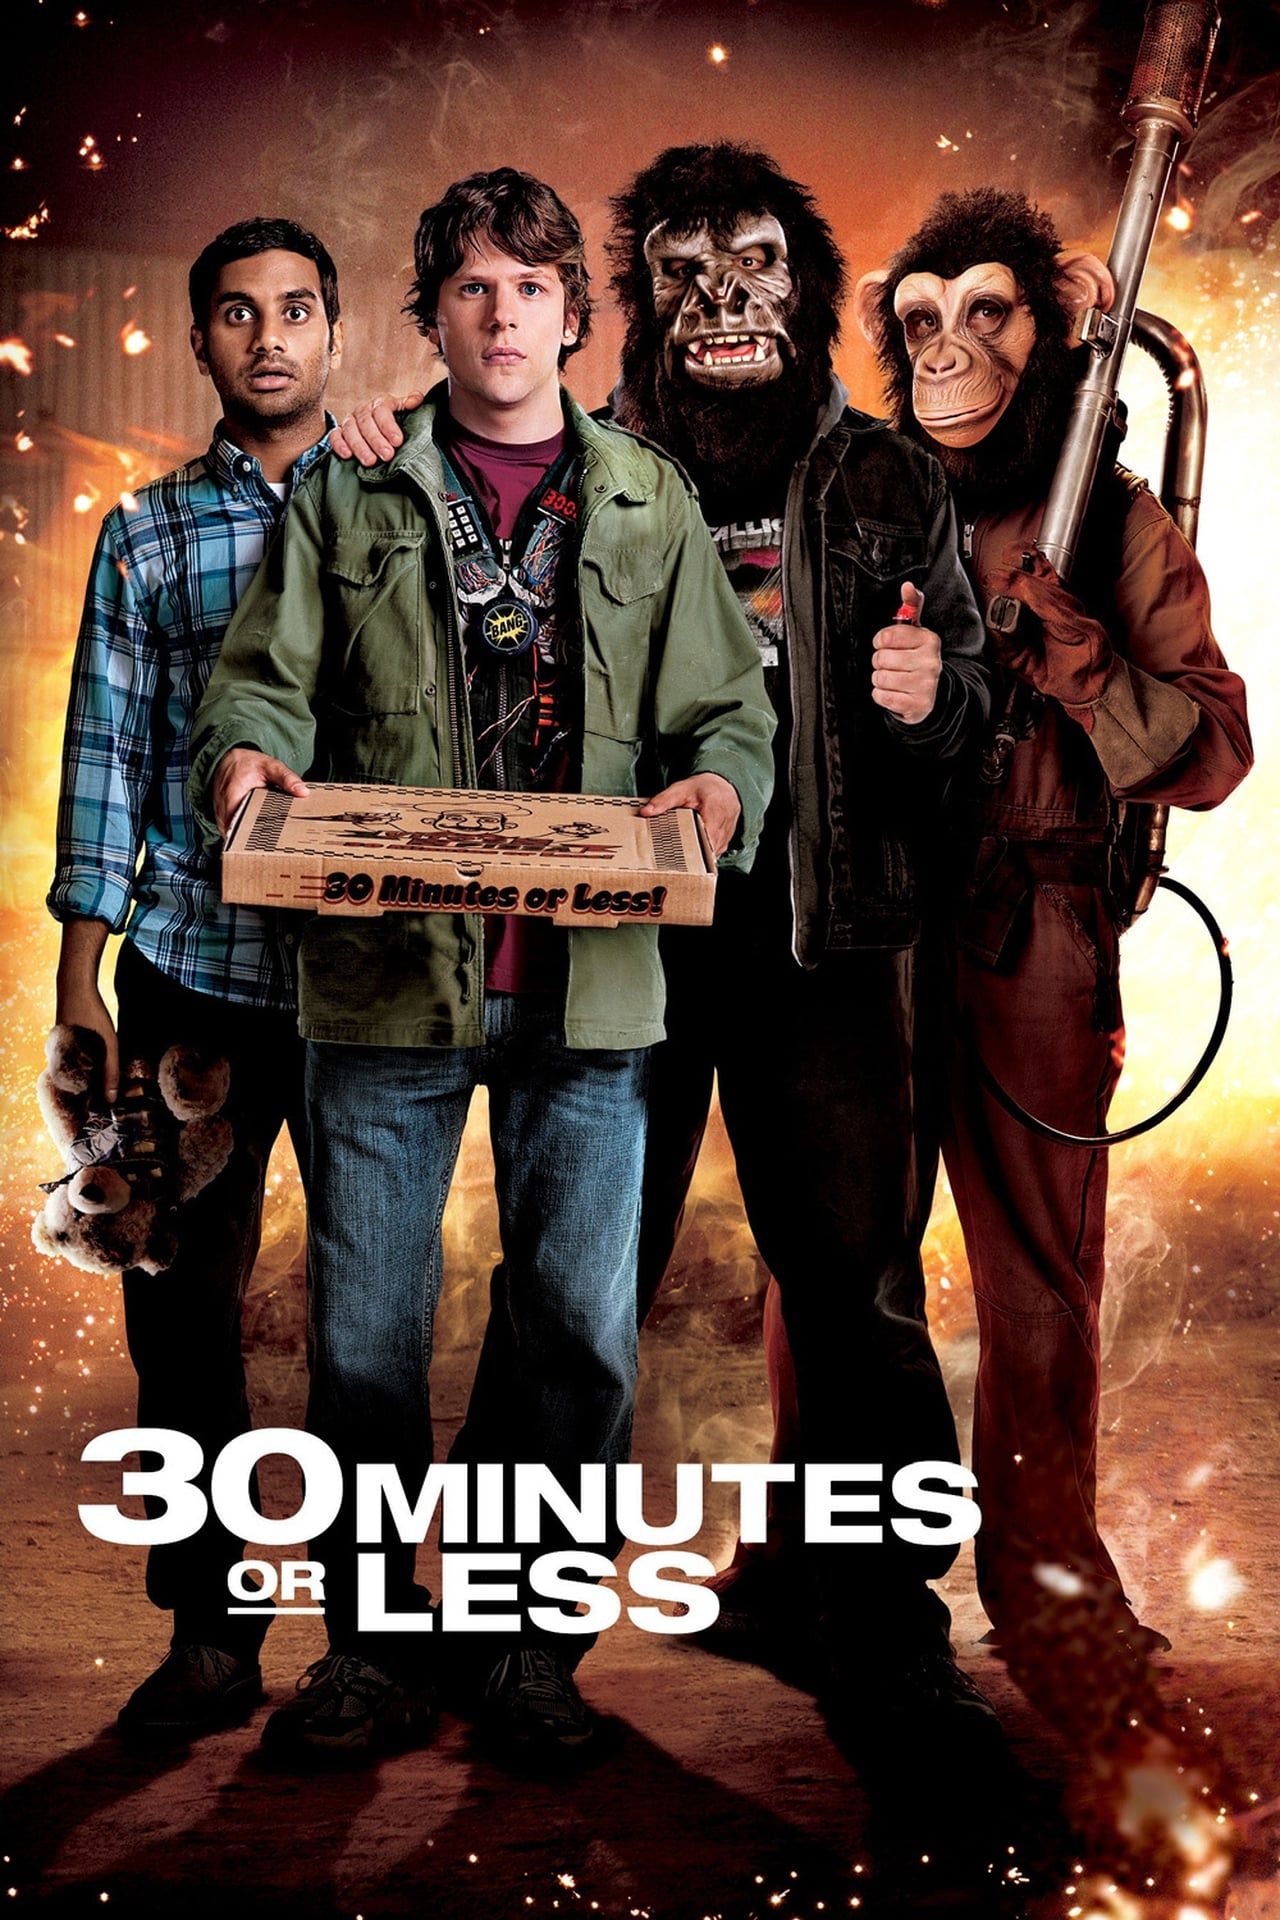 30 Minutes or Less showing Jesse Eisenberg with characters dressed as monkeys